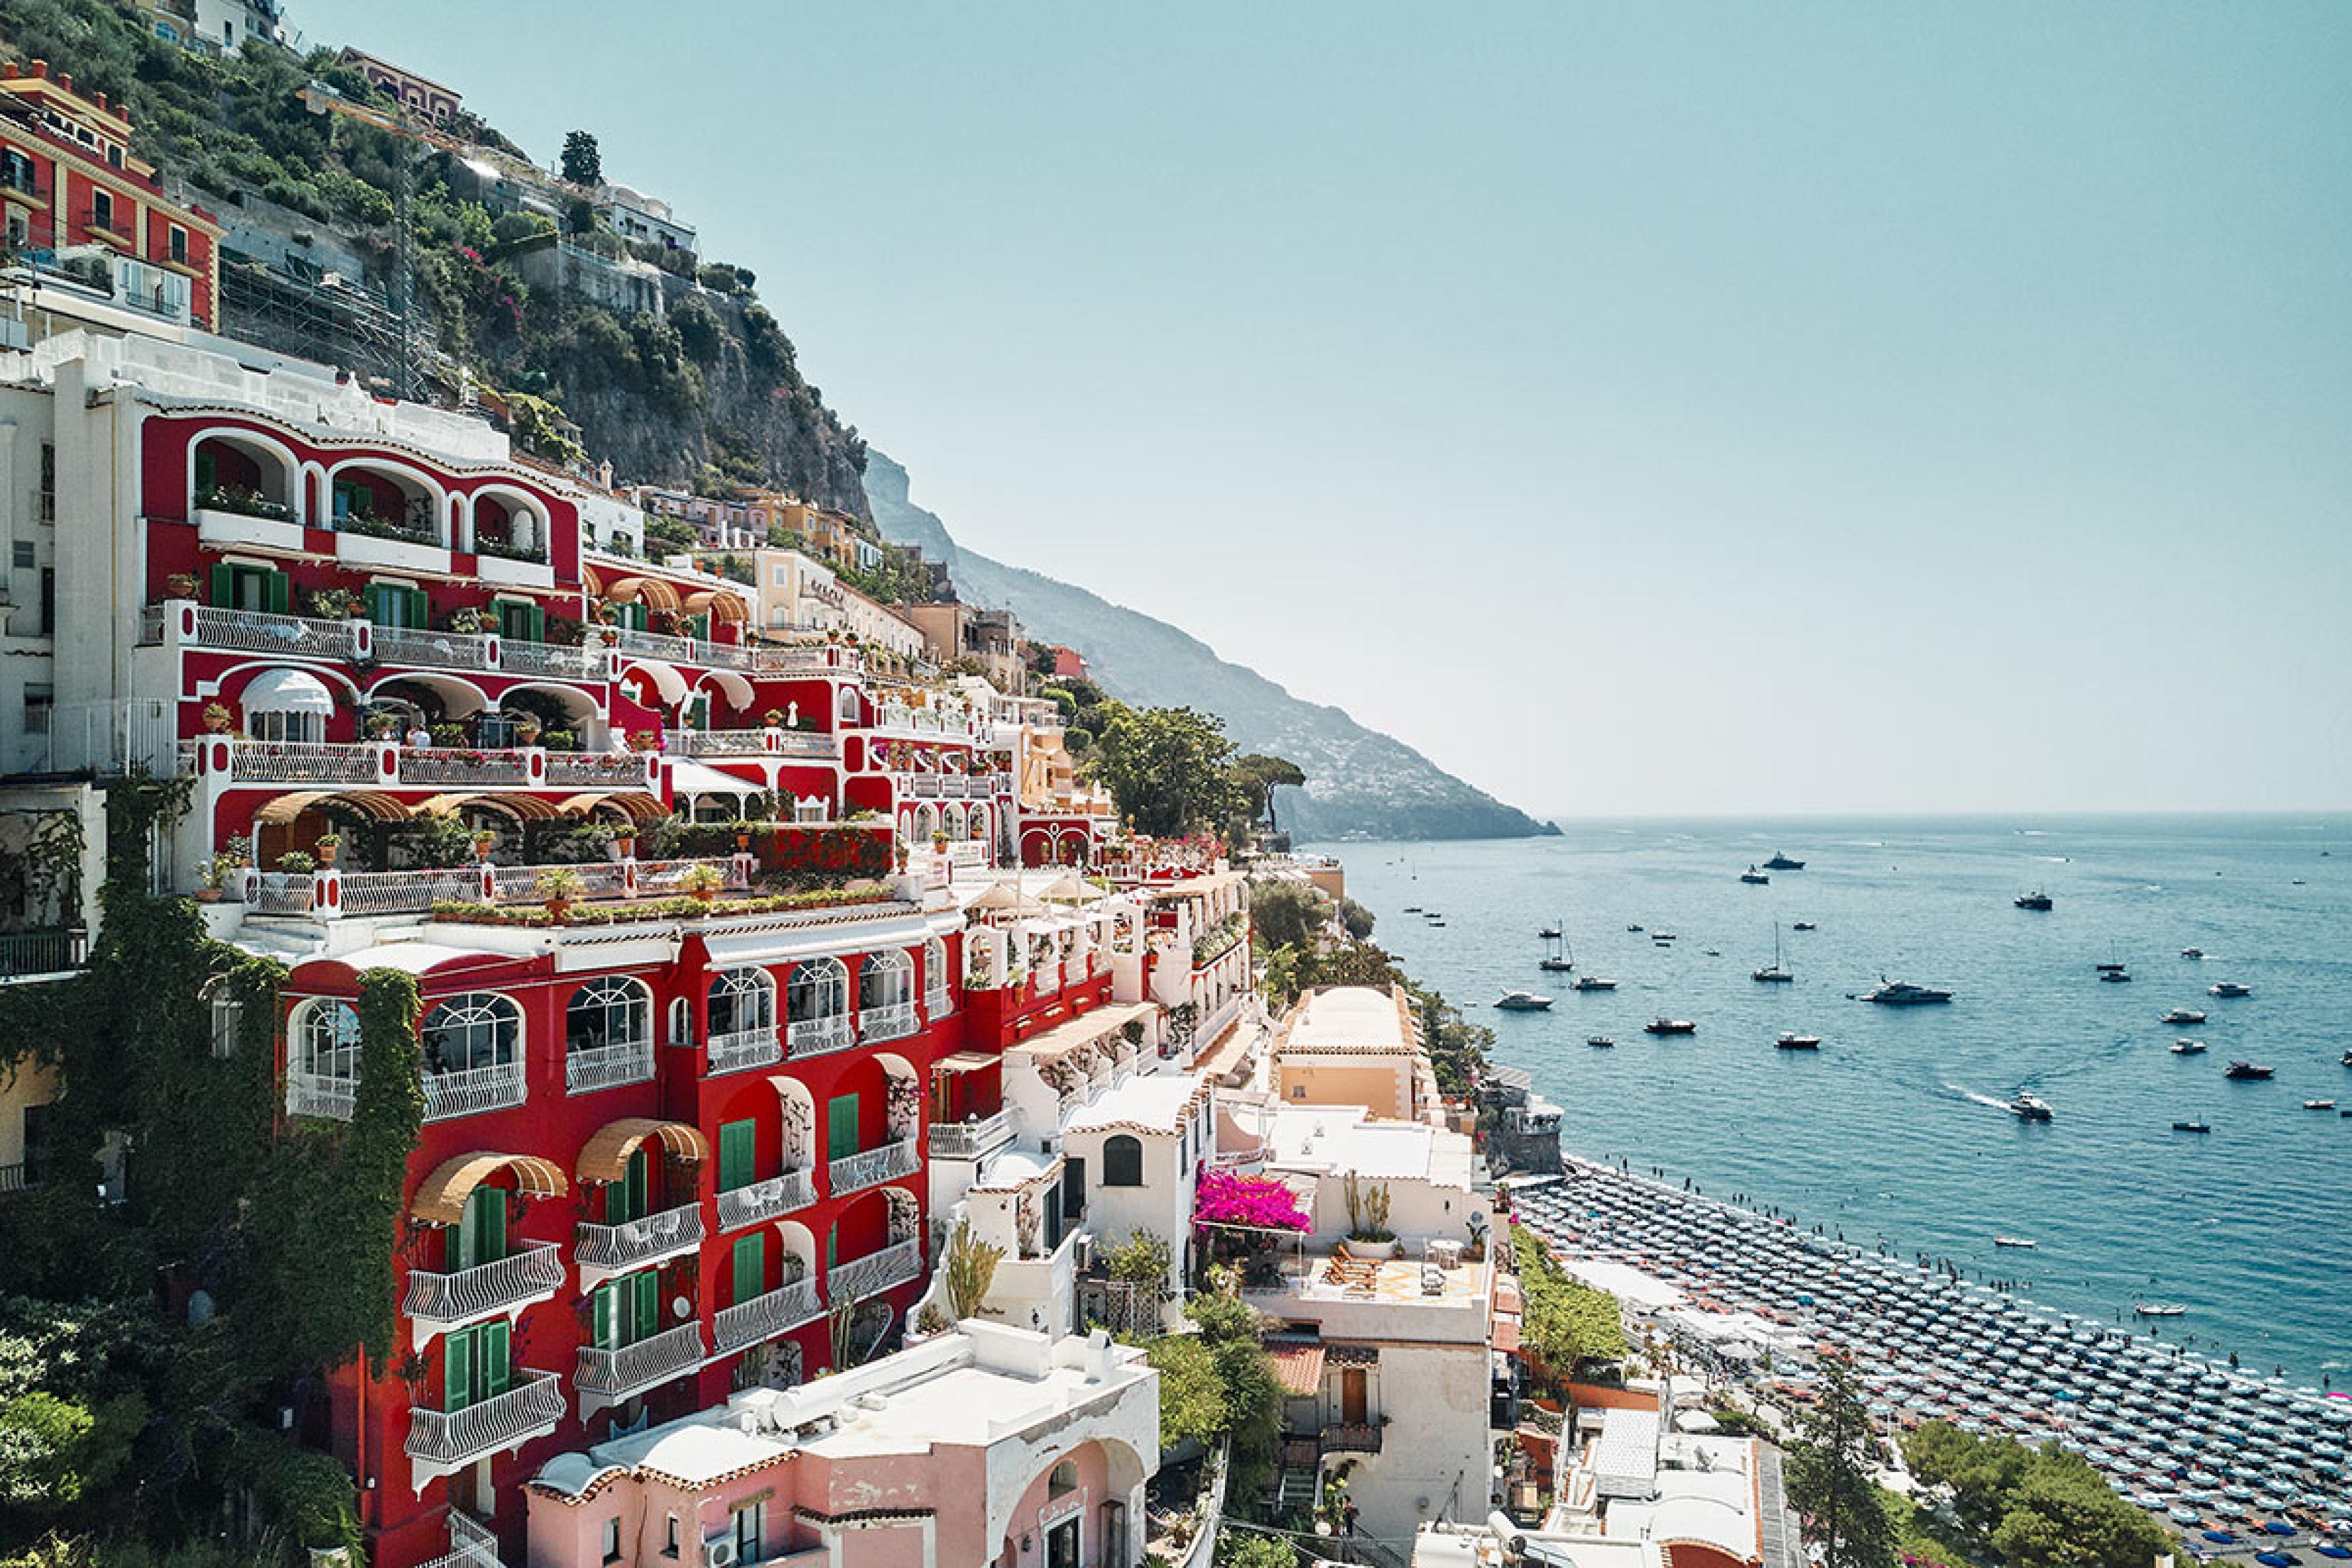 view of positano with red hotel building on left